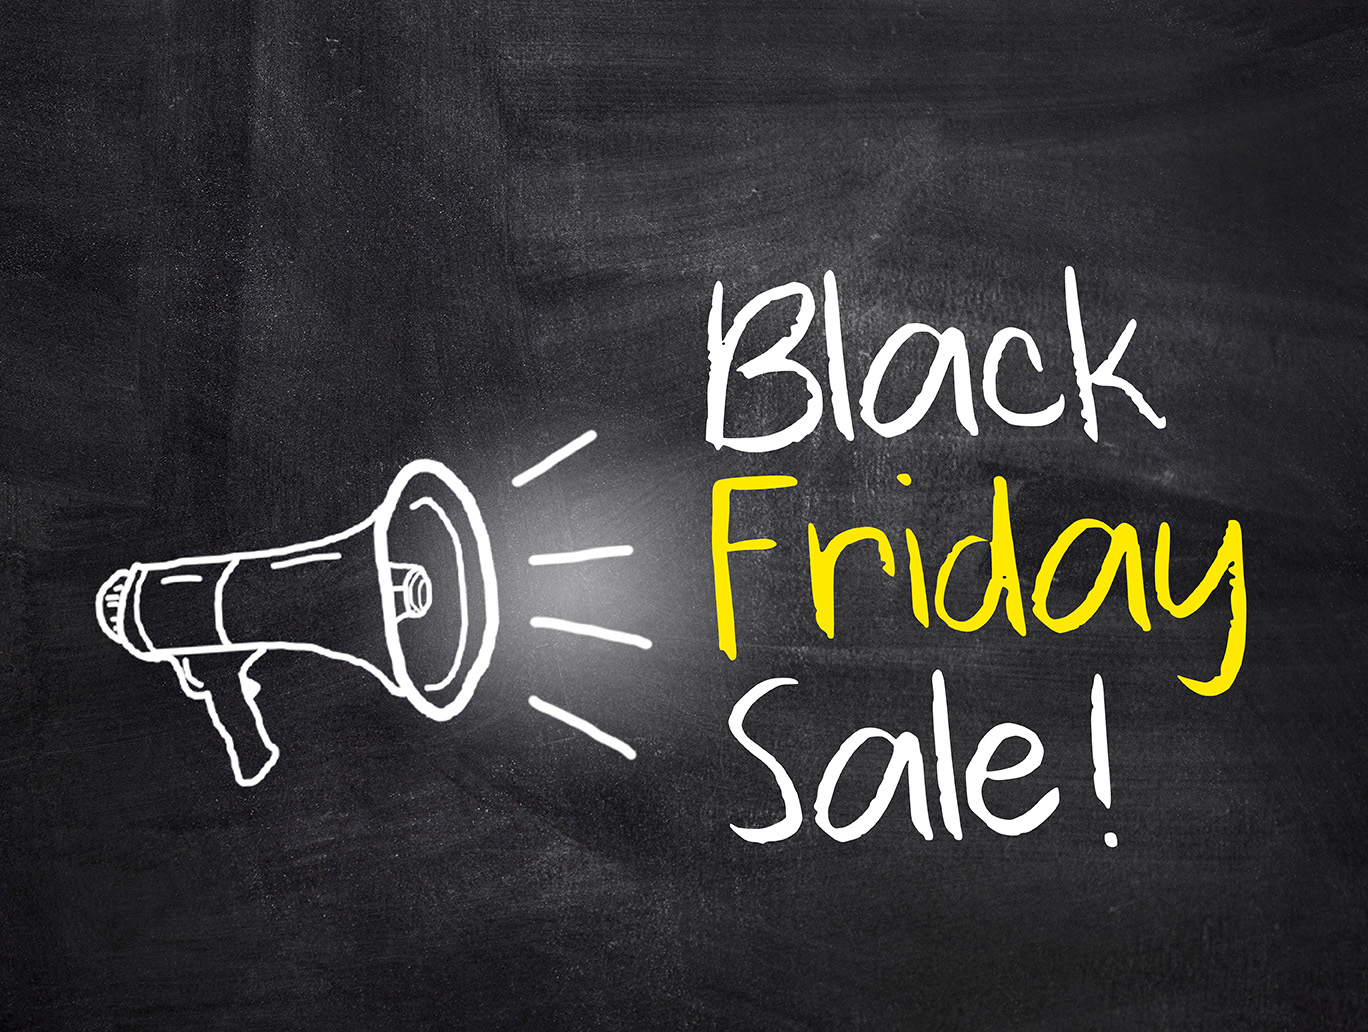 black friday marketing, black friday sale announcment, cyber monday, email marketing, email campagins